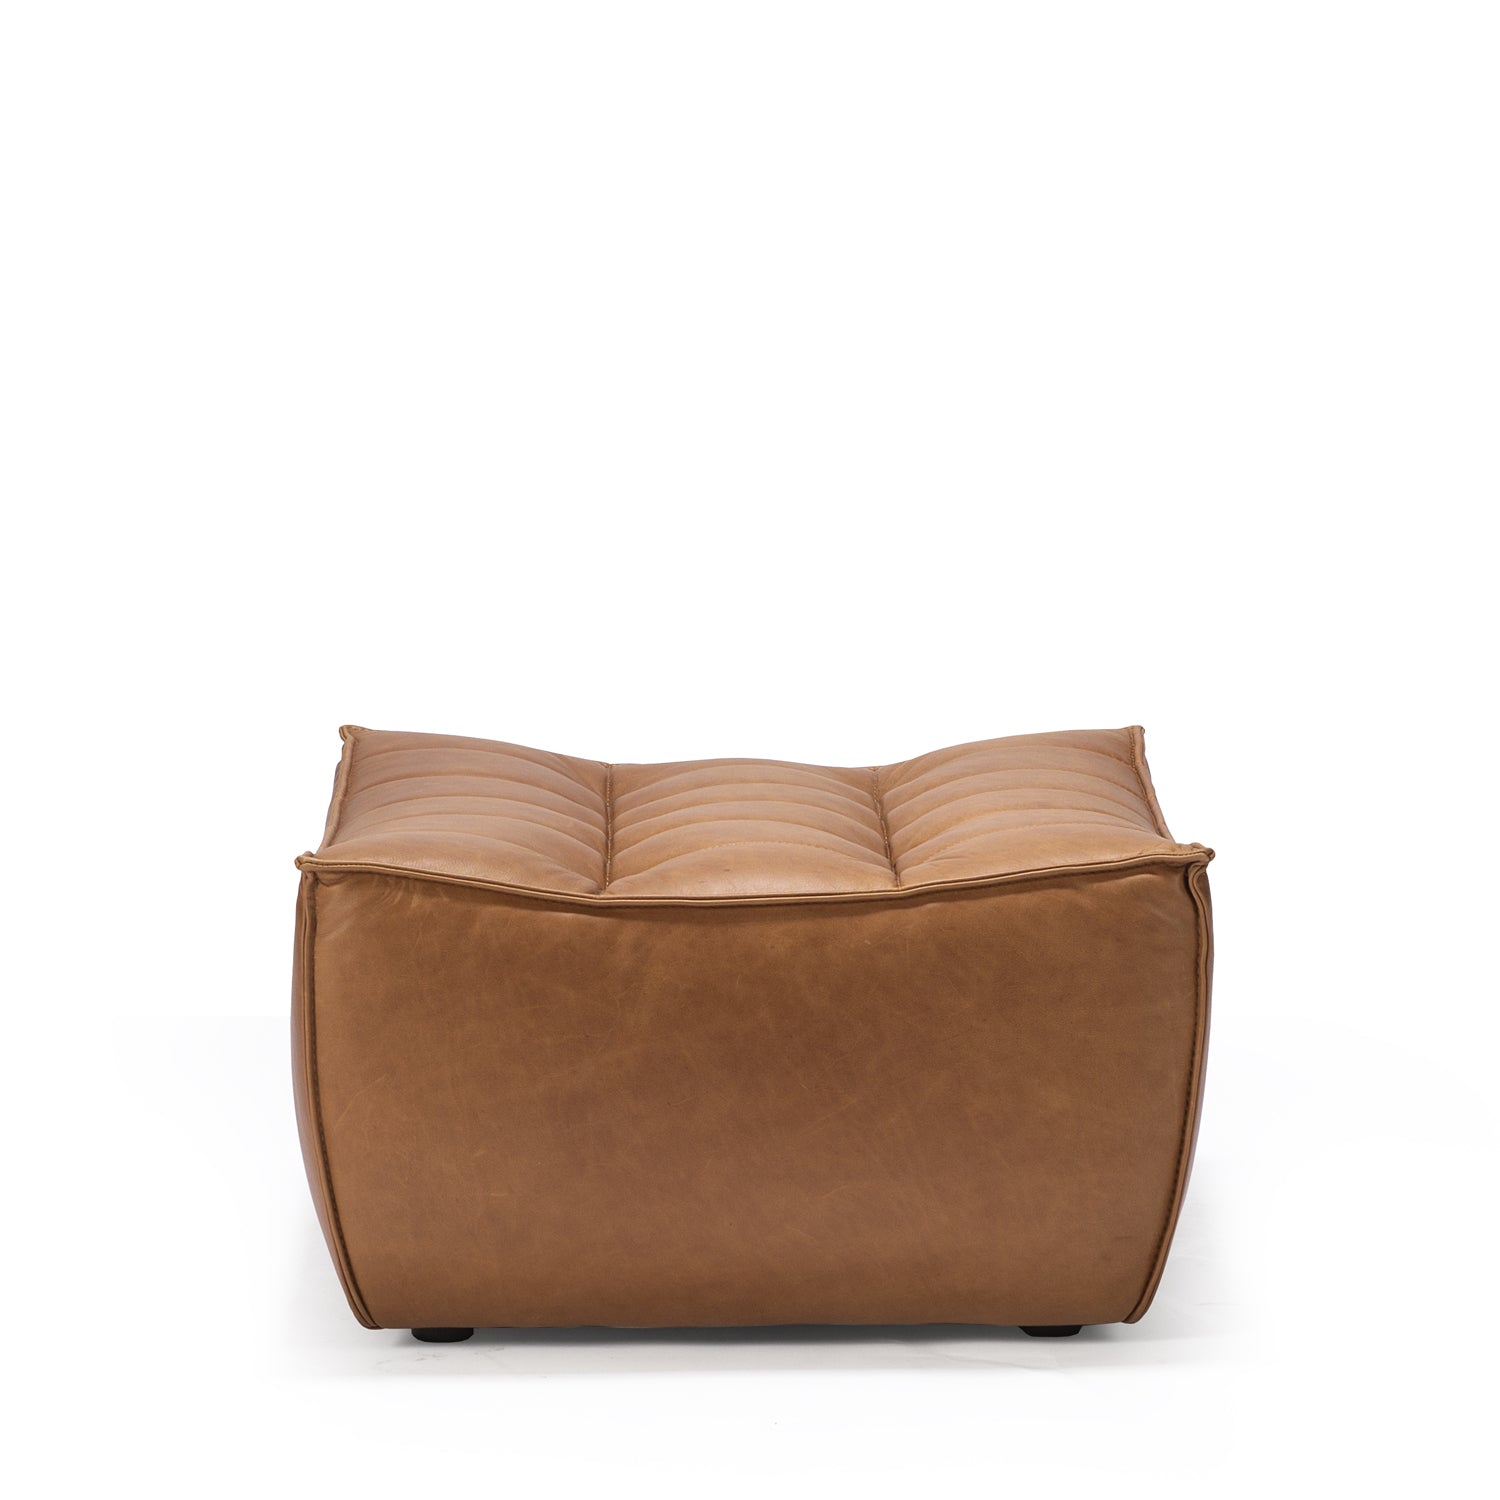 Jacques - Leather Ottoman - Old Saddle  {N701}